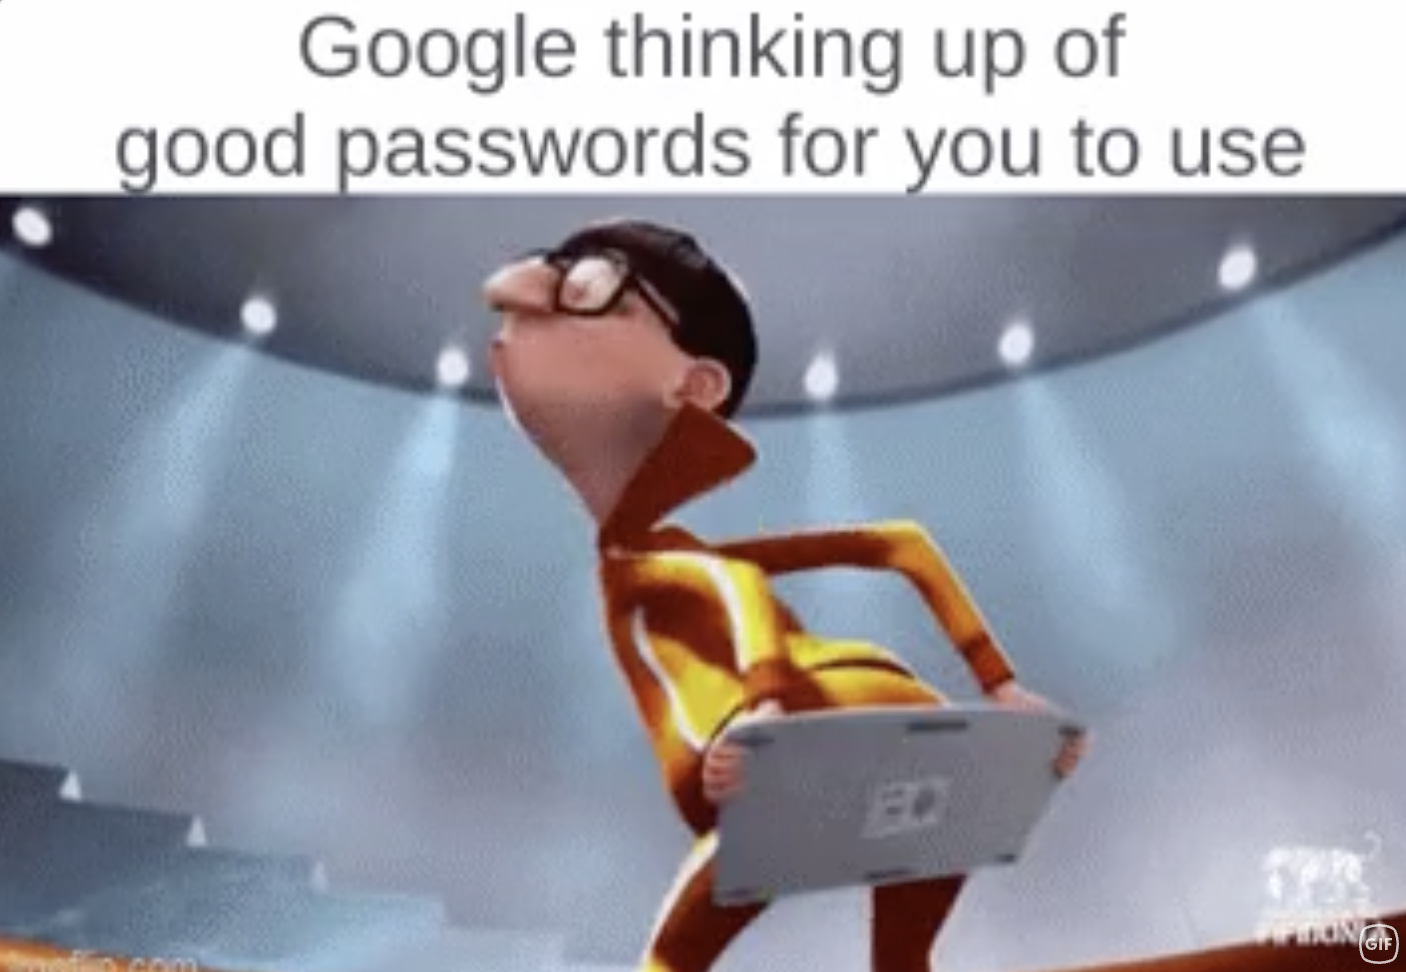 muscle - Google thinking up of good passwords for you to use Ed Ng